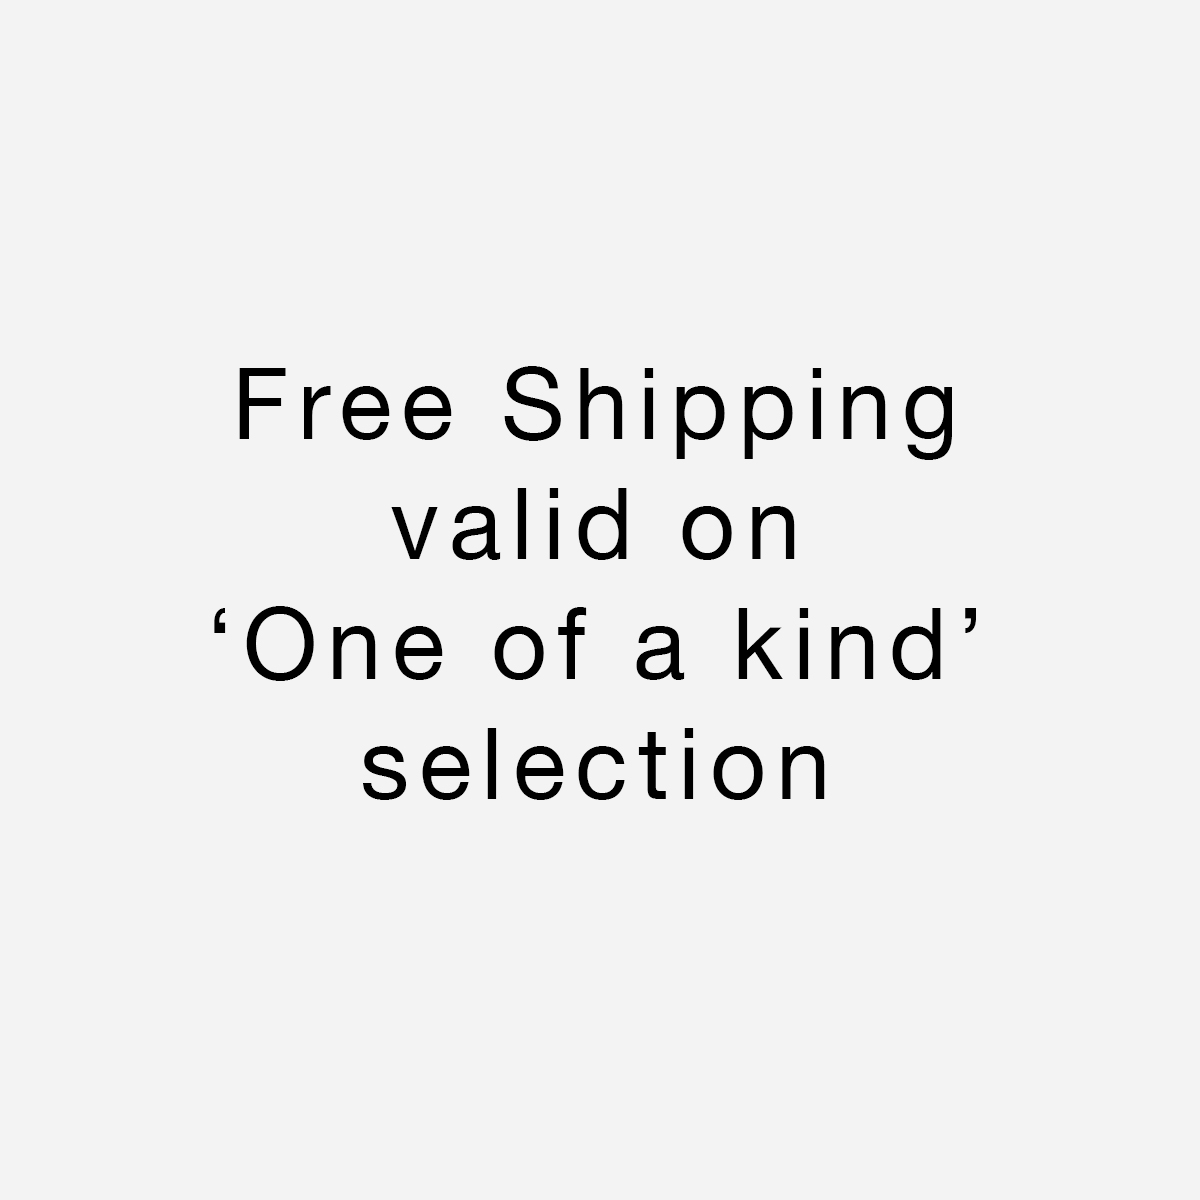 Promo: Free Shipping One Of A Kind